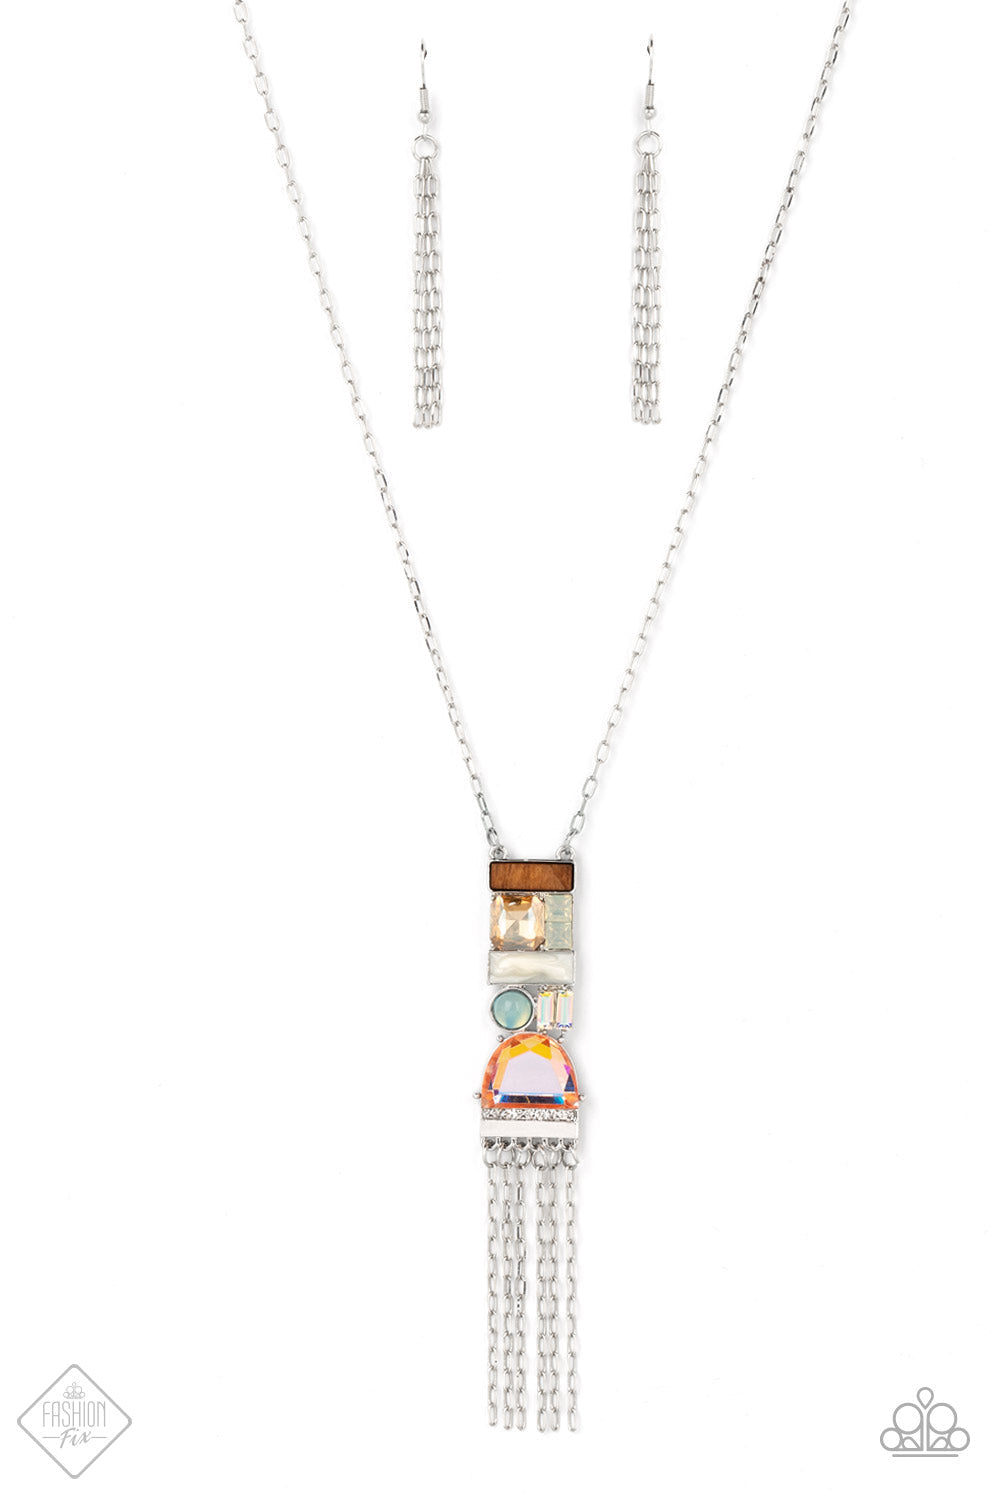 Ms. DIY - Multi Color Gem - Silver Necklace - Paparazzi Accessories - Geometric shapes in various colors gathers into a trendy art deco-inspired pendant. An array of materials like wood, opal, and glittery gems add a handcrafted vibe to the pendant on a long silver chain, with a stream of sparkling silver chains.